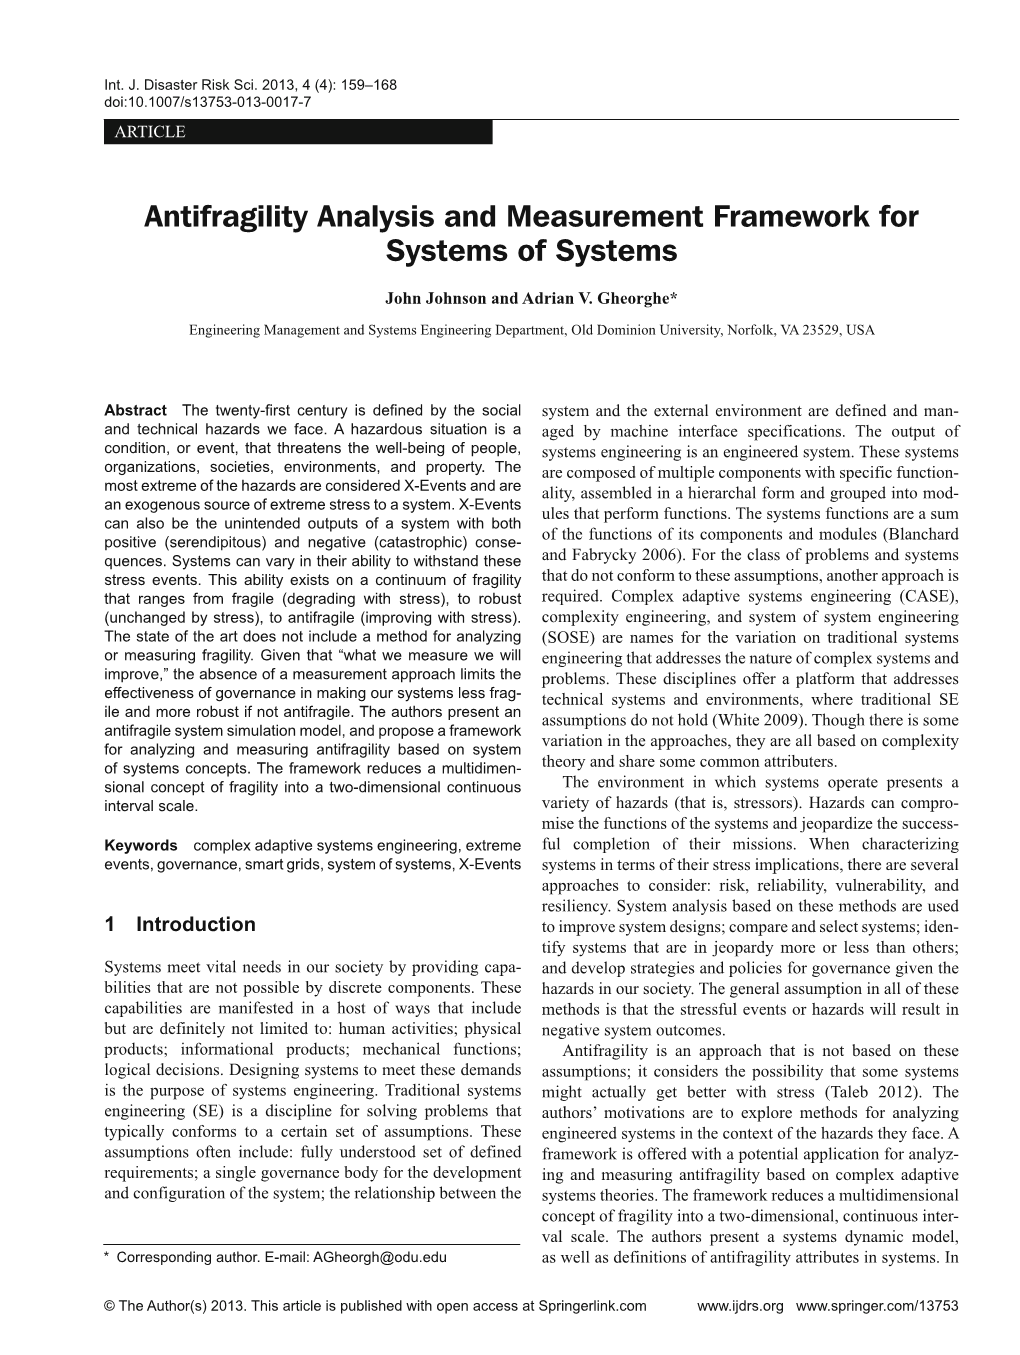 Antifragility Analysis and Measurement Framework for Systems of Systems